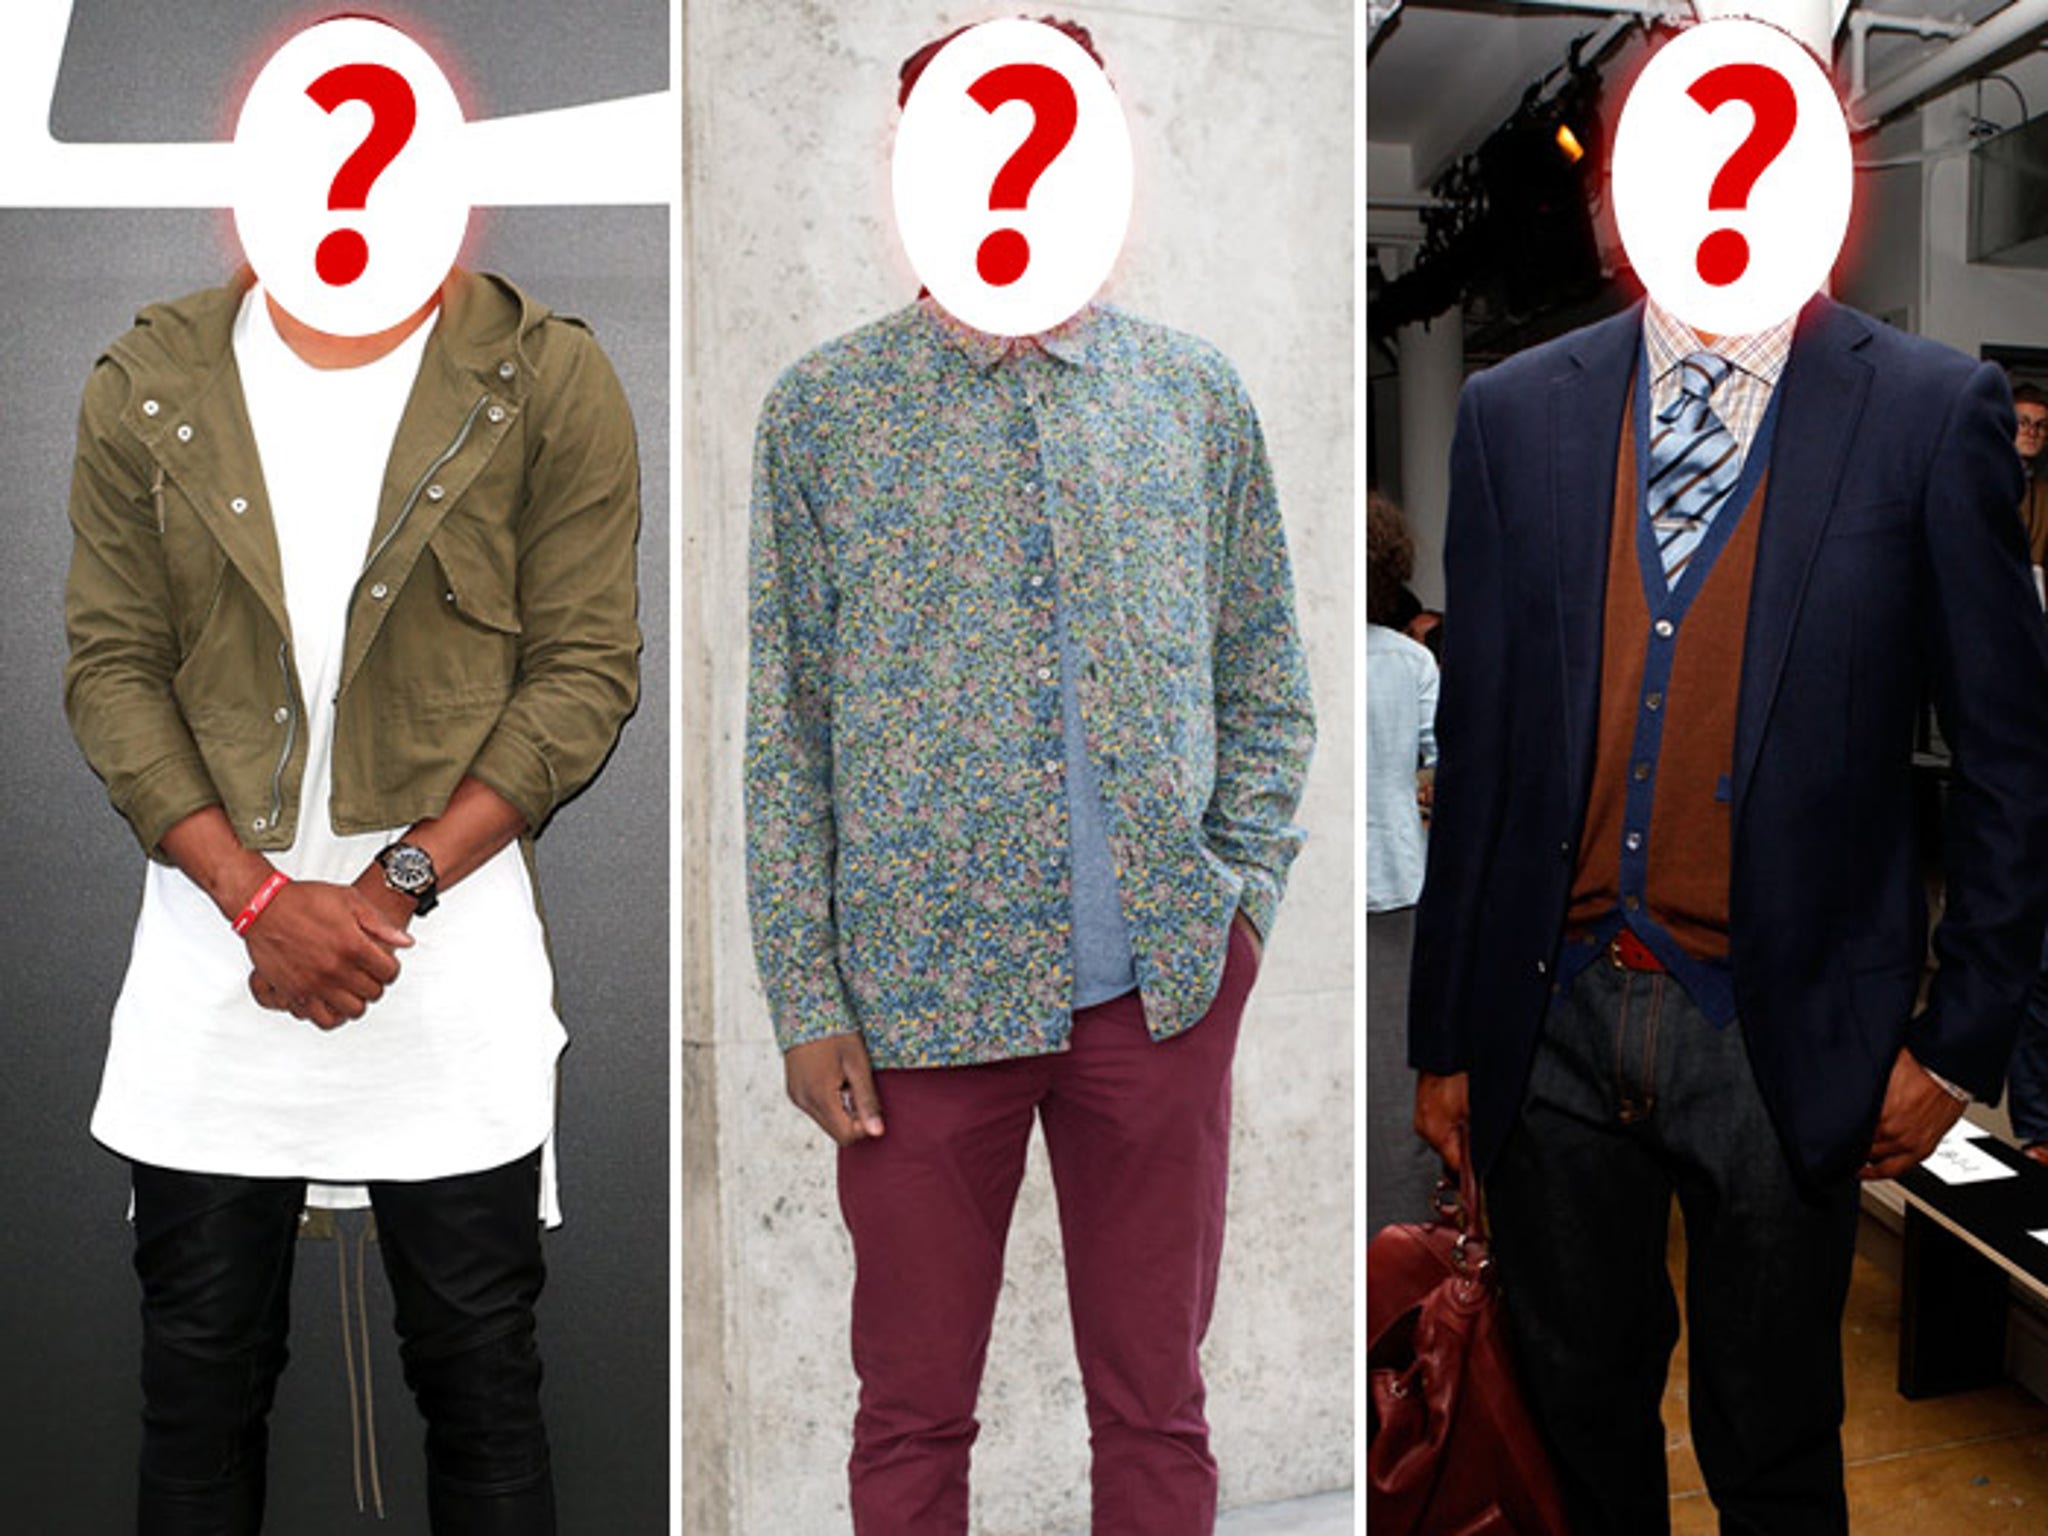 NBA Fashion -- HOOPSTER OR HIPSTER . Can You Guess Who's Who?